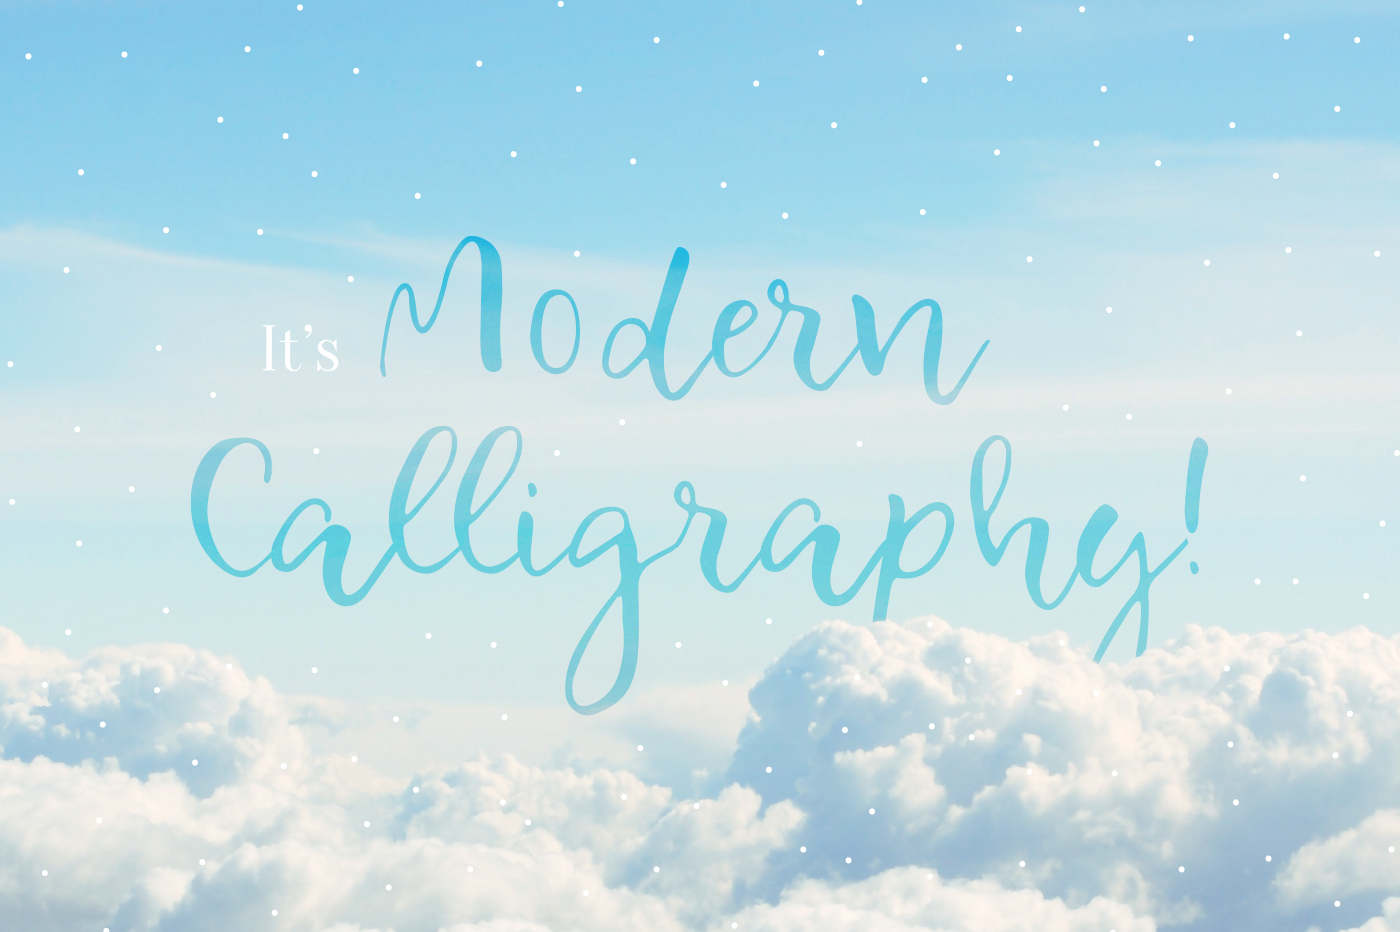 Free font font Cyrillic Calligraphy   Typeface free typeface